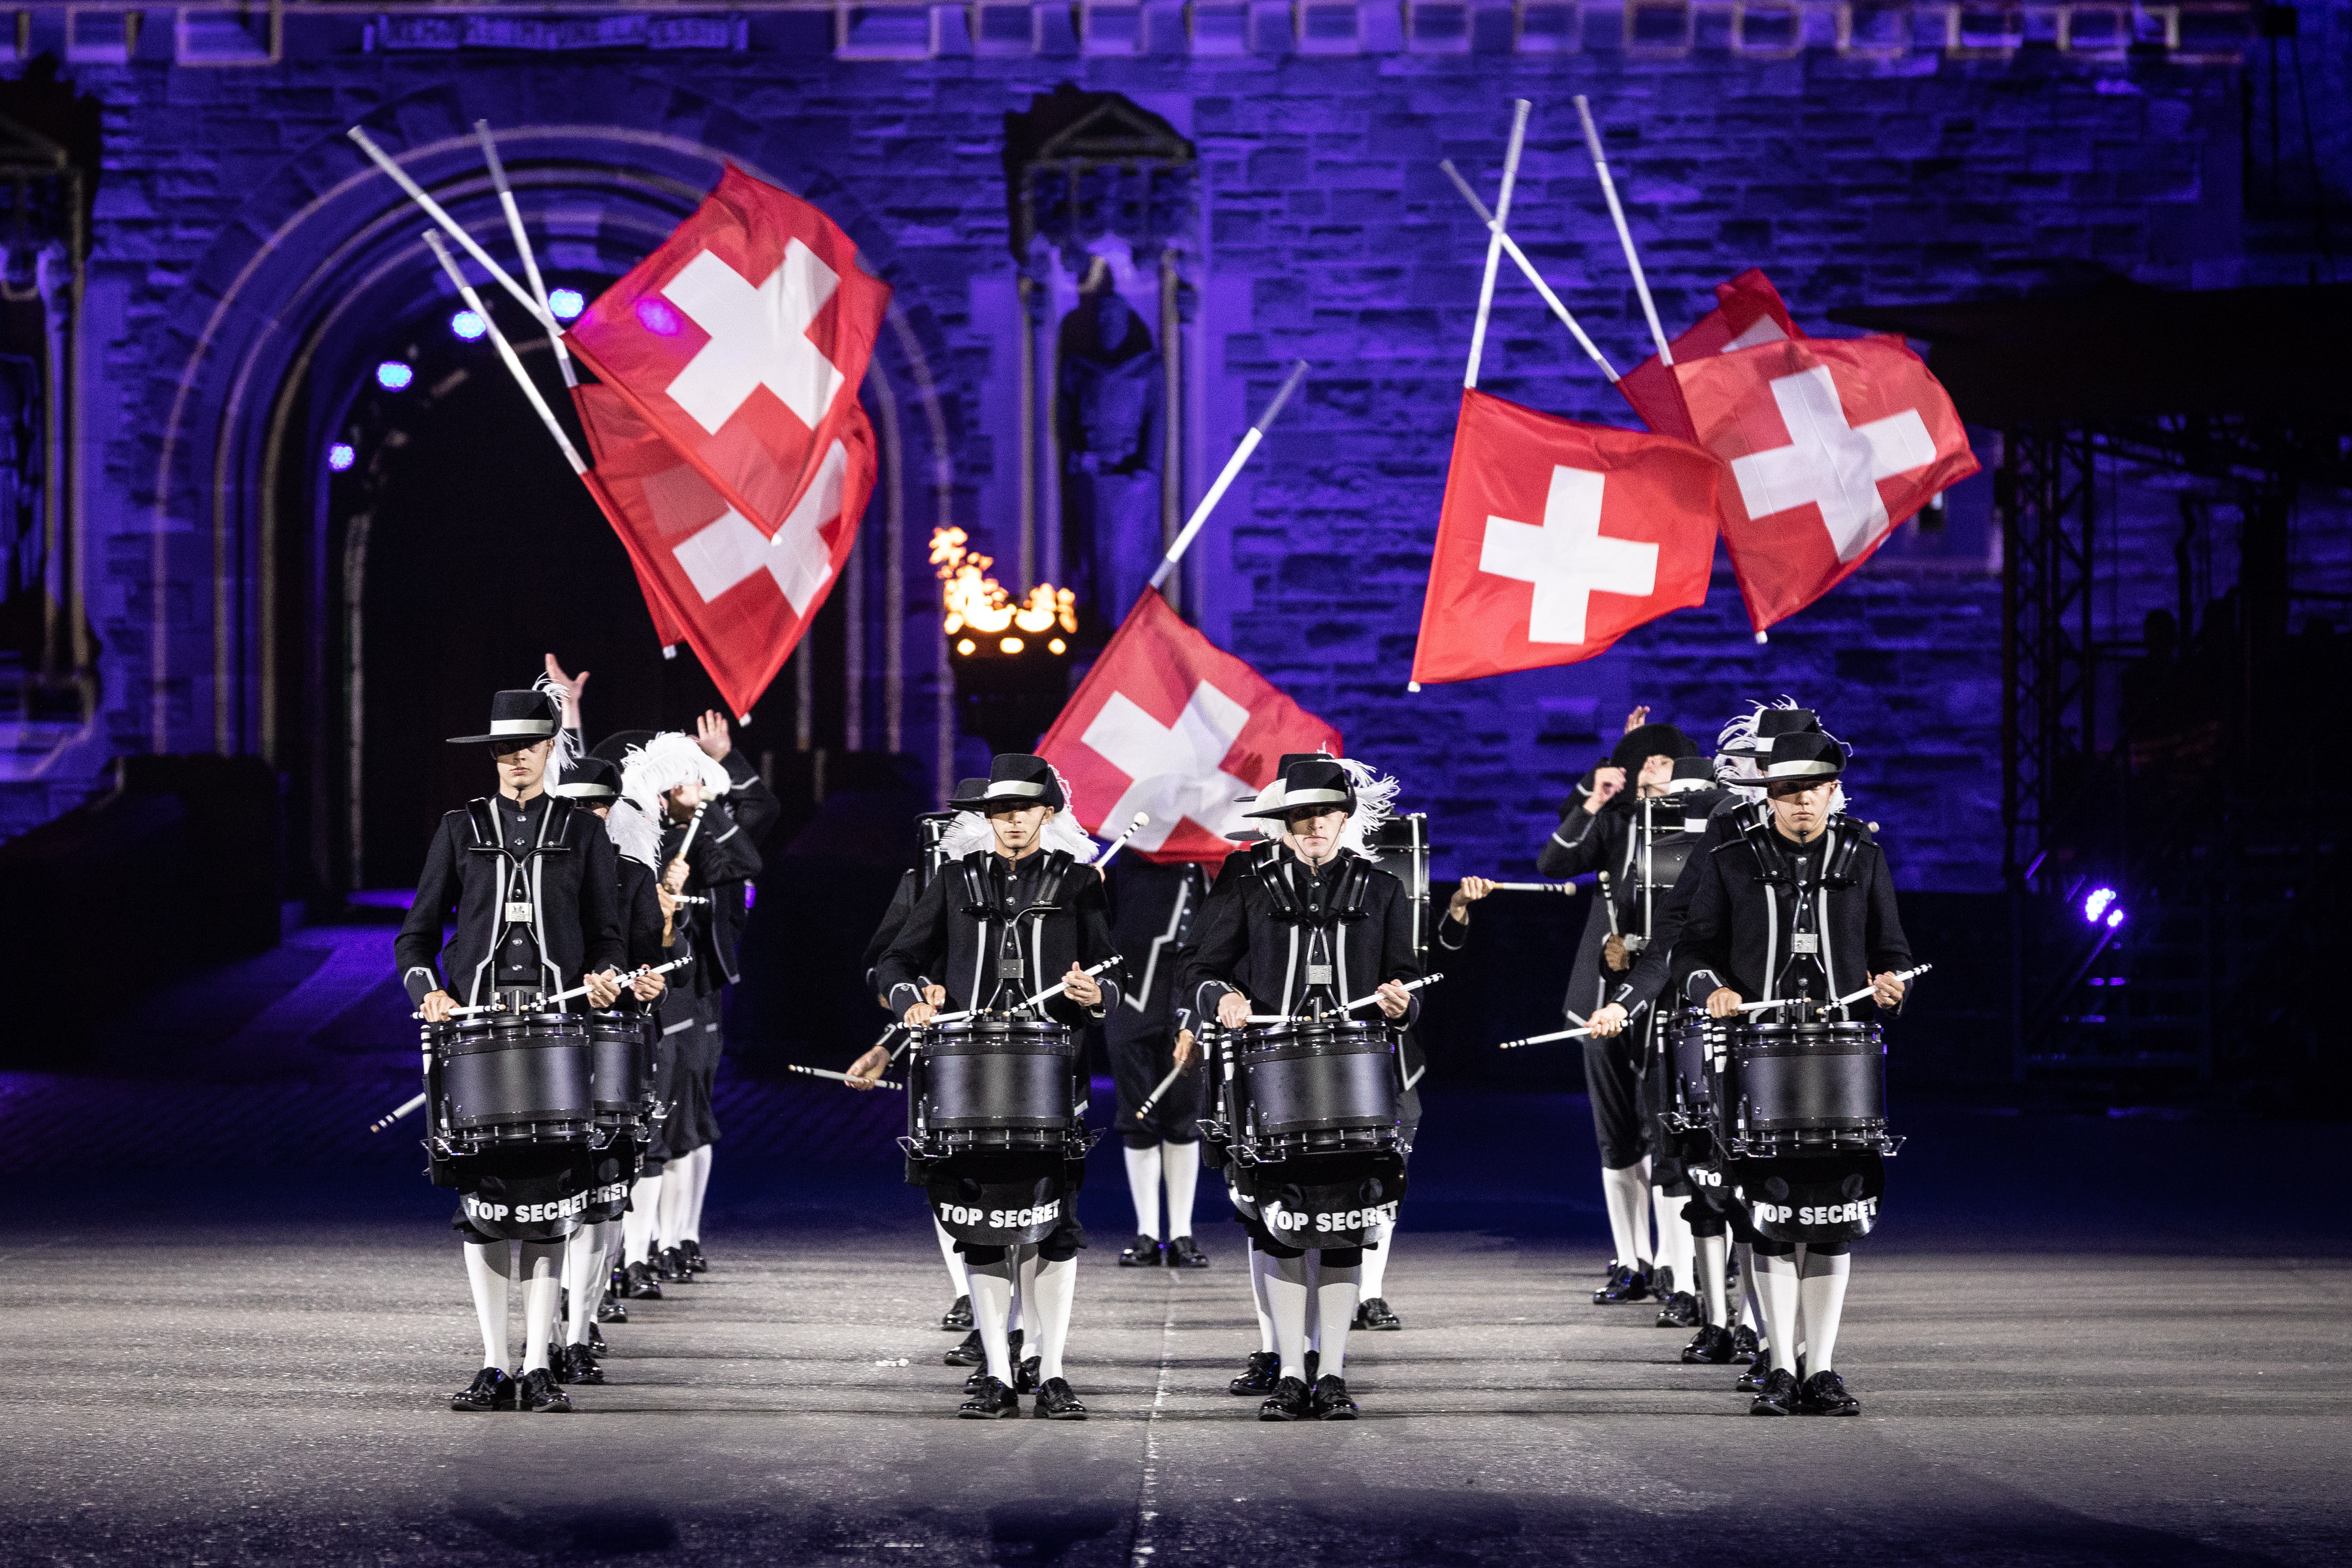 Image shows drummers perform with Switzerland flags outside Edinburgh Castle.